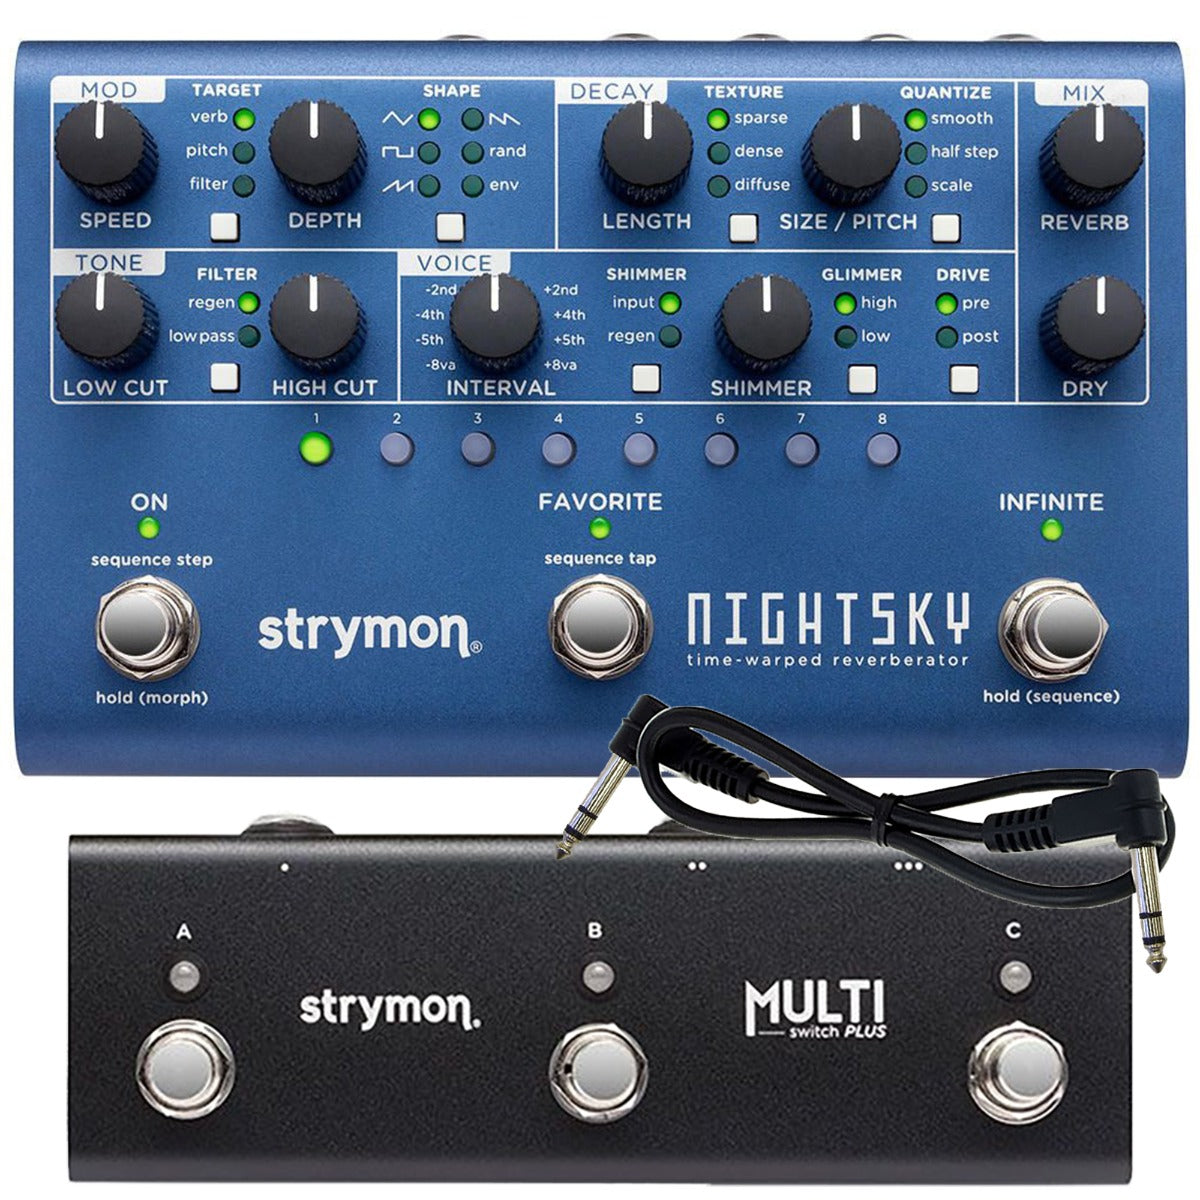 Collage of the components in the Strymon NightSky Time-Warped Reverberator Effect Pedal with Multiswitch Plus BUNDLE